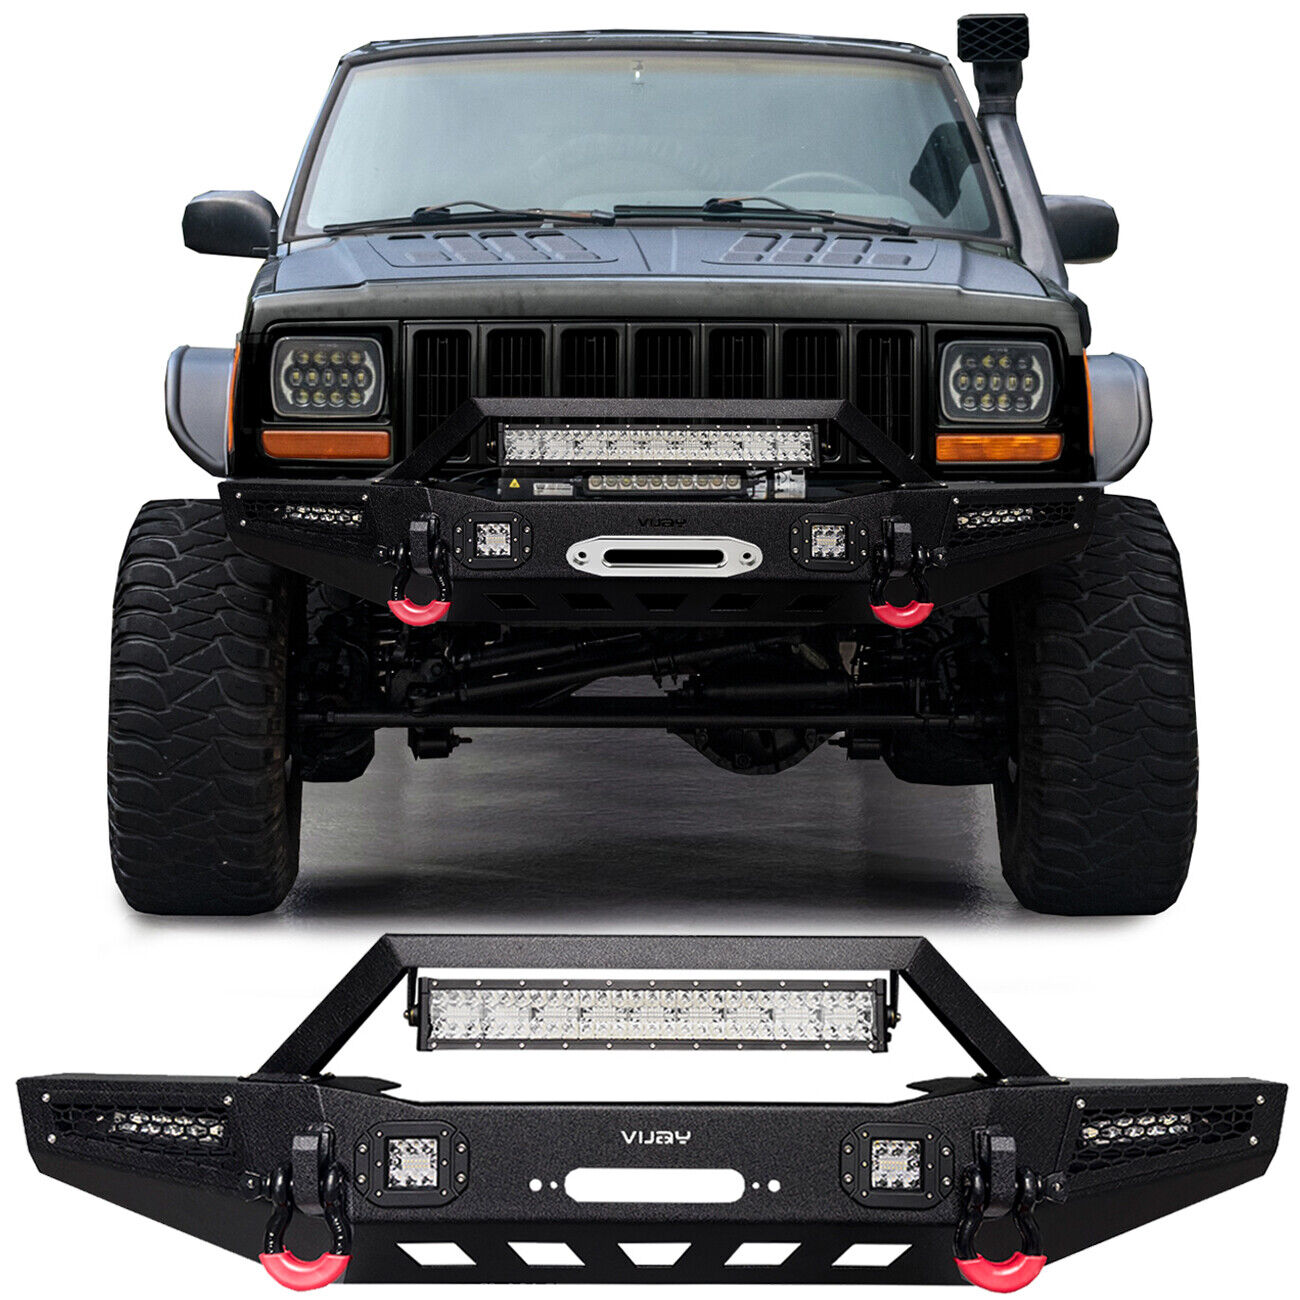 Vijay Fits 1984-2001 Jeep Cherokee XJ New Front or Rear Bumper with LED Lights